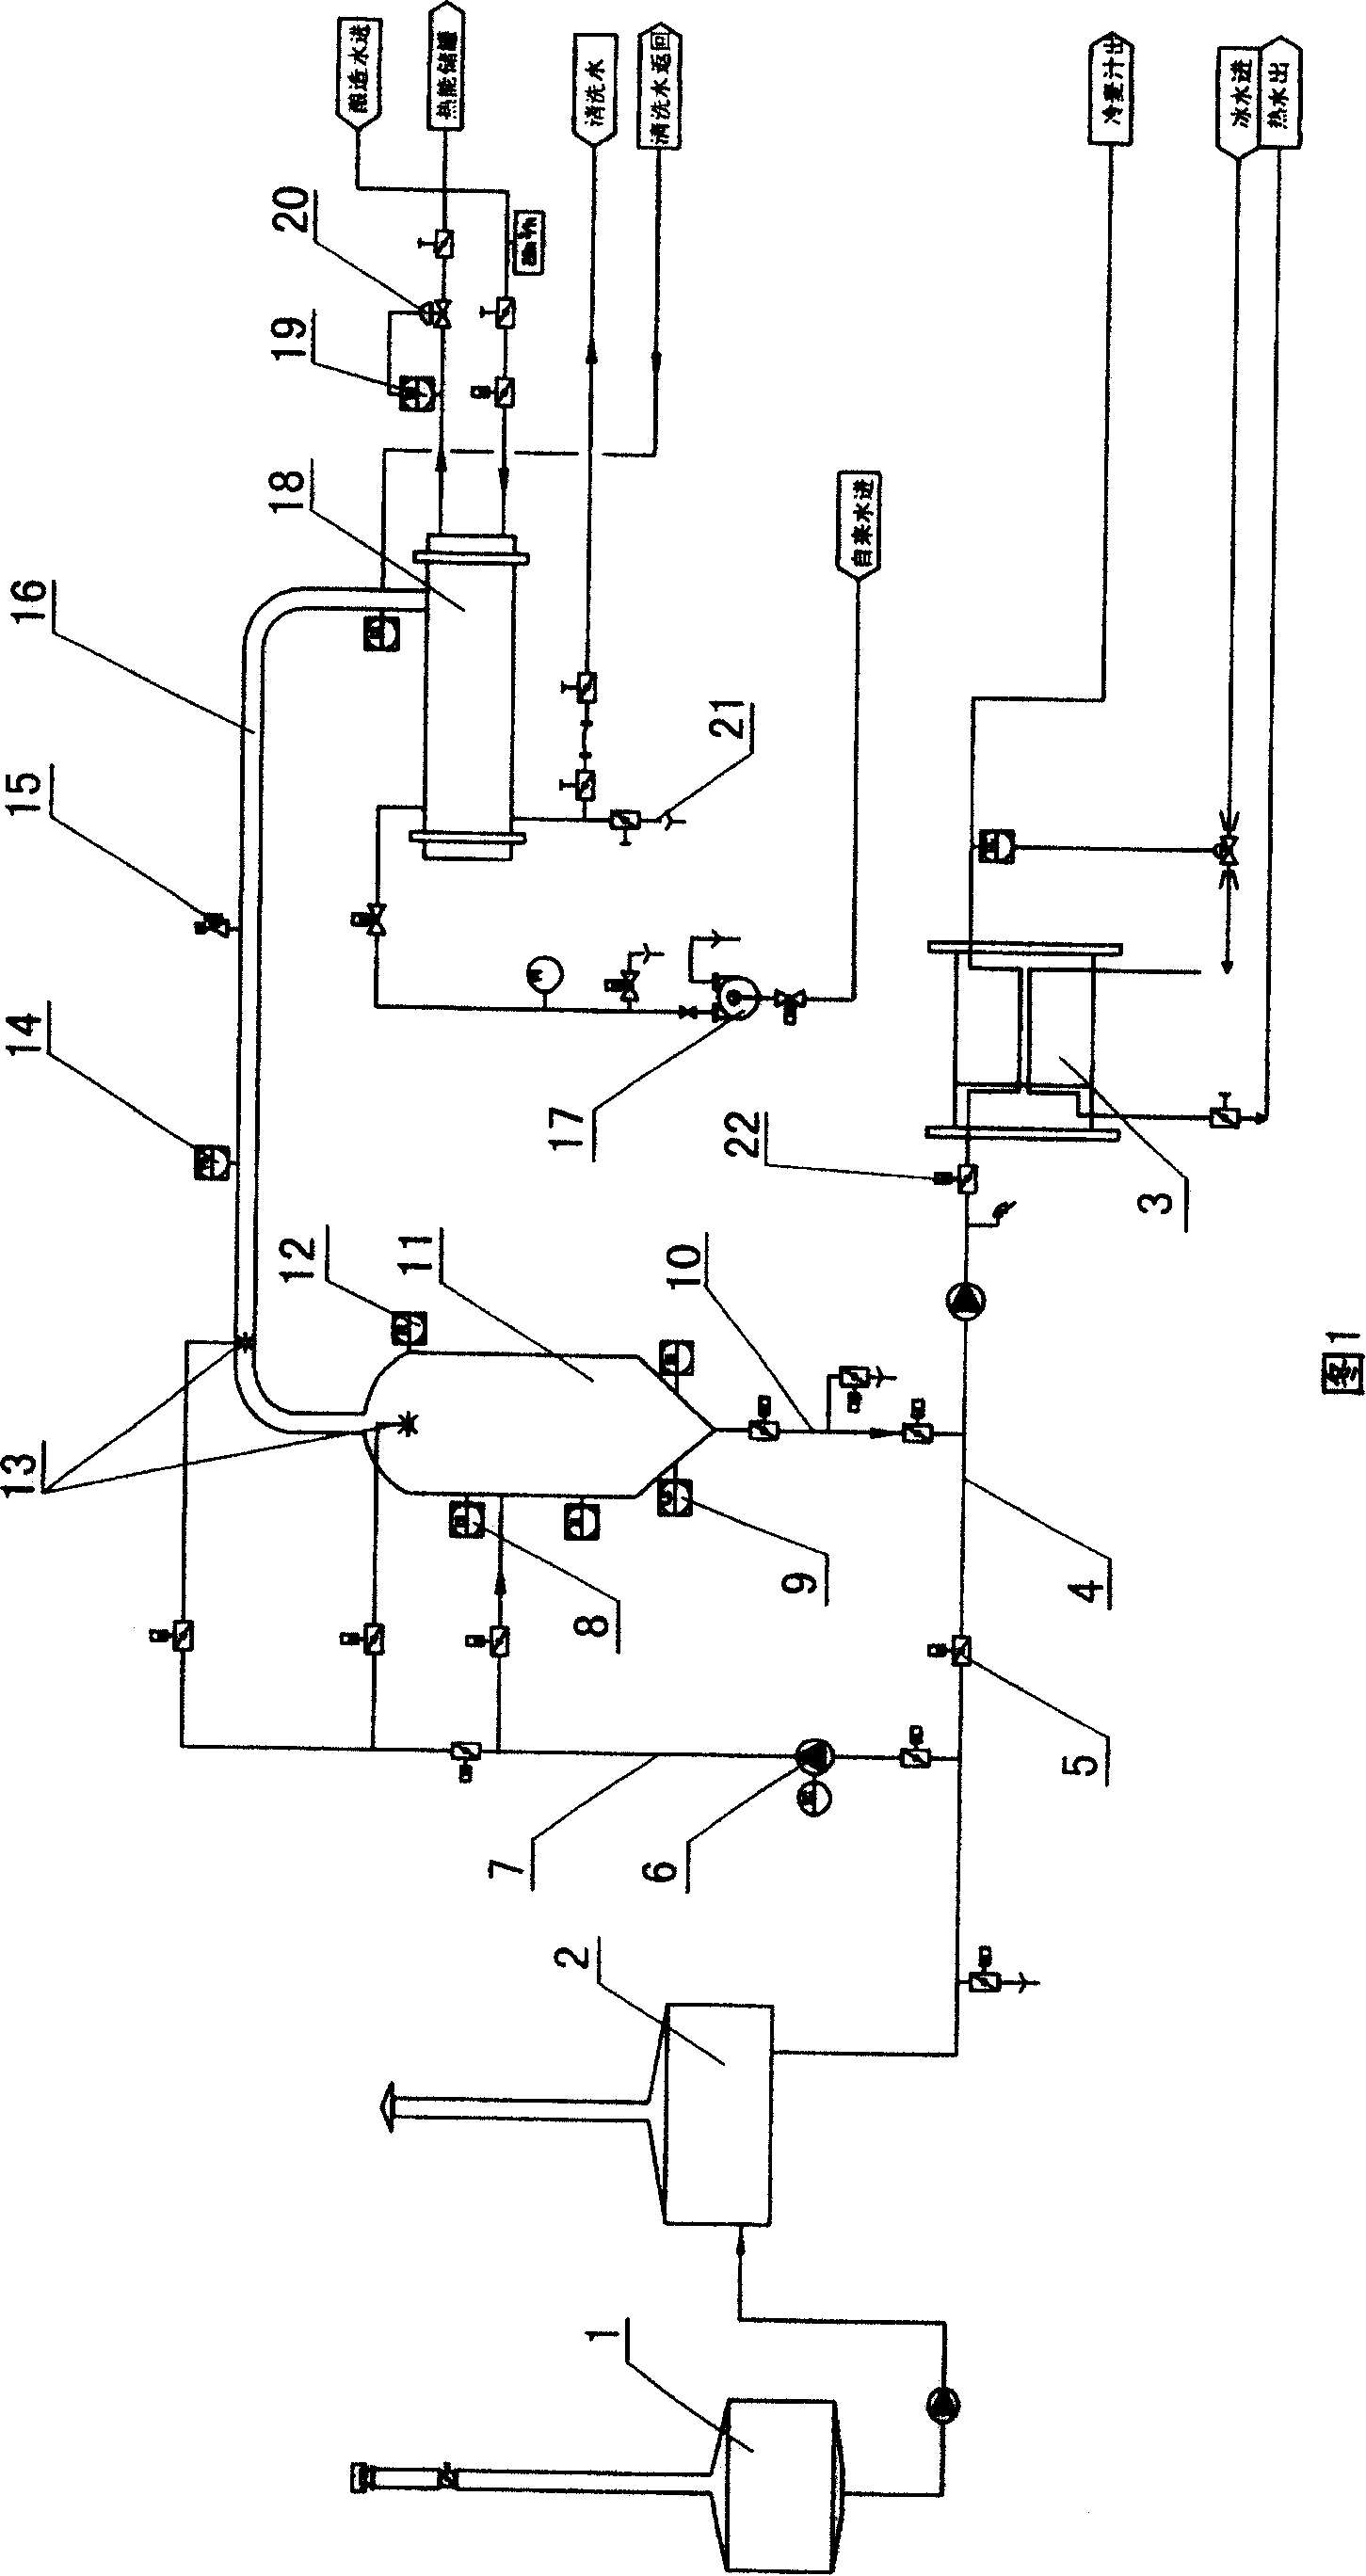 Flash evaporation system for wheat juice